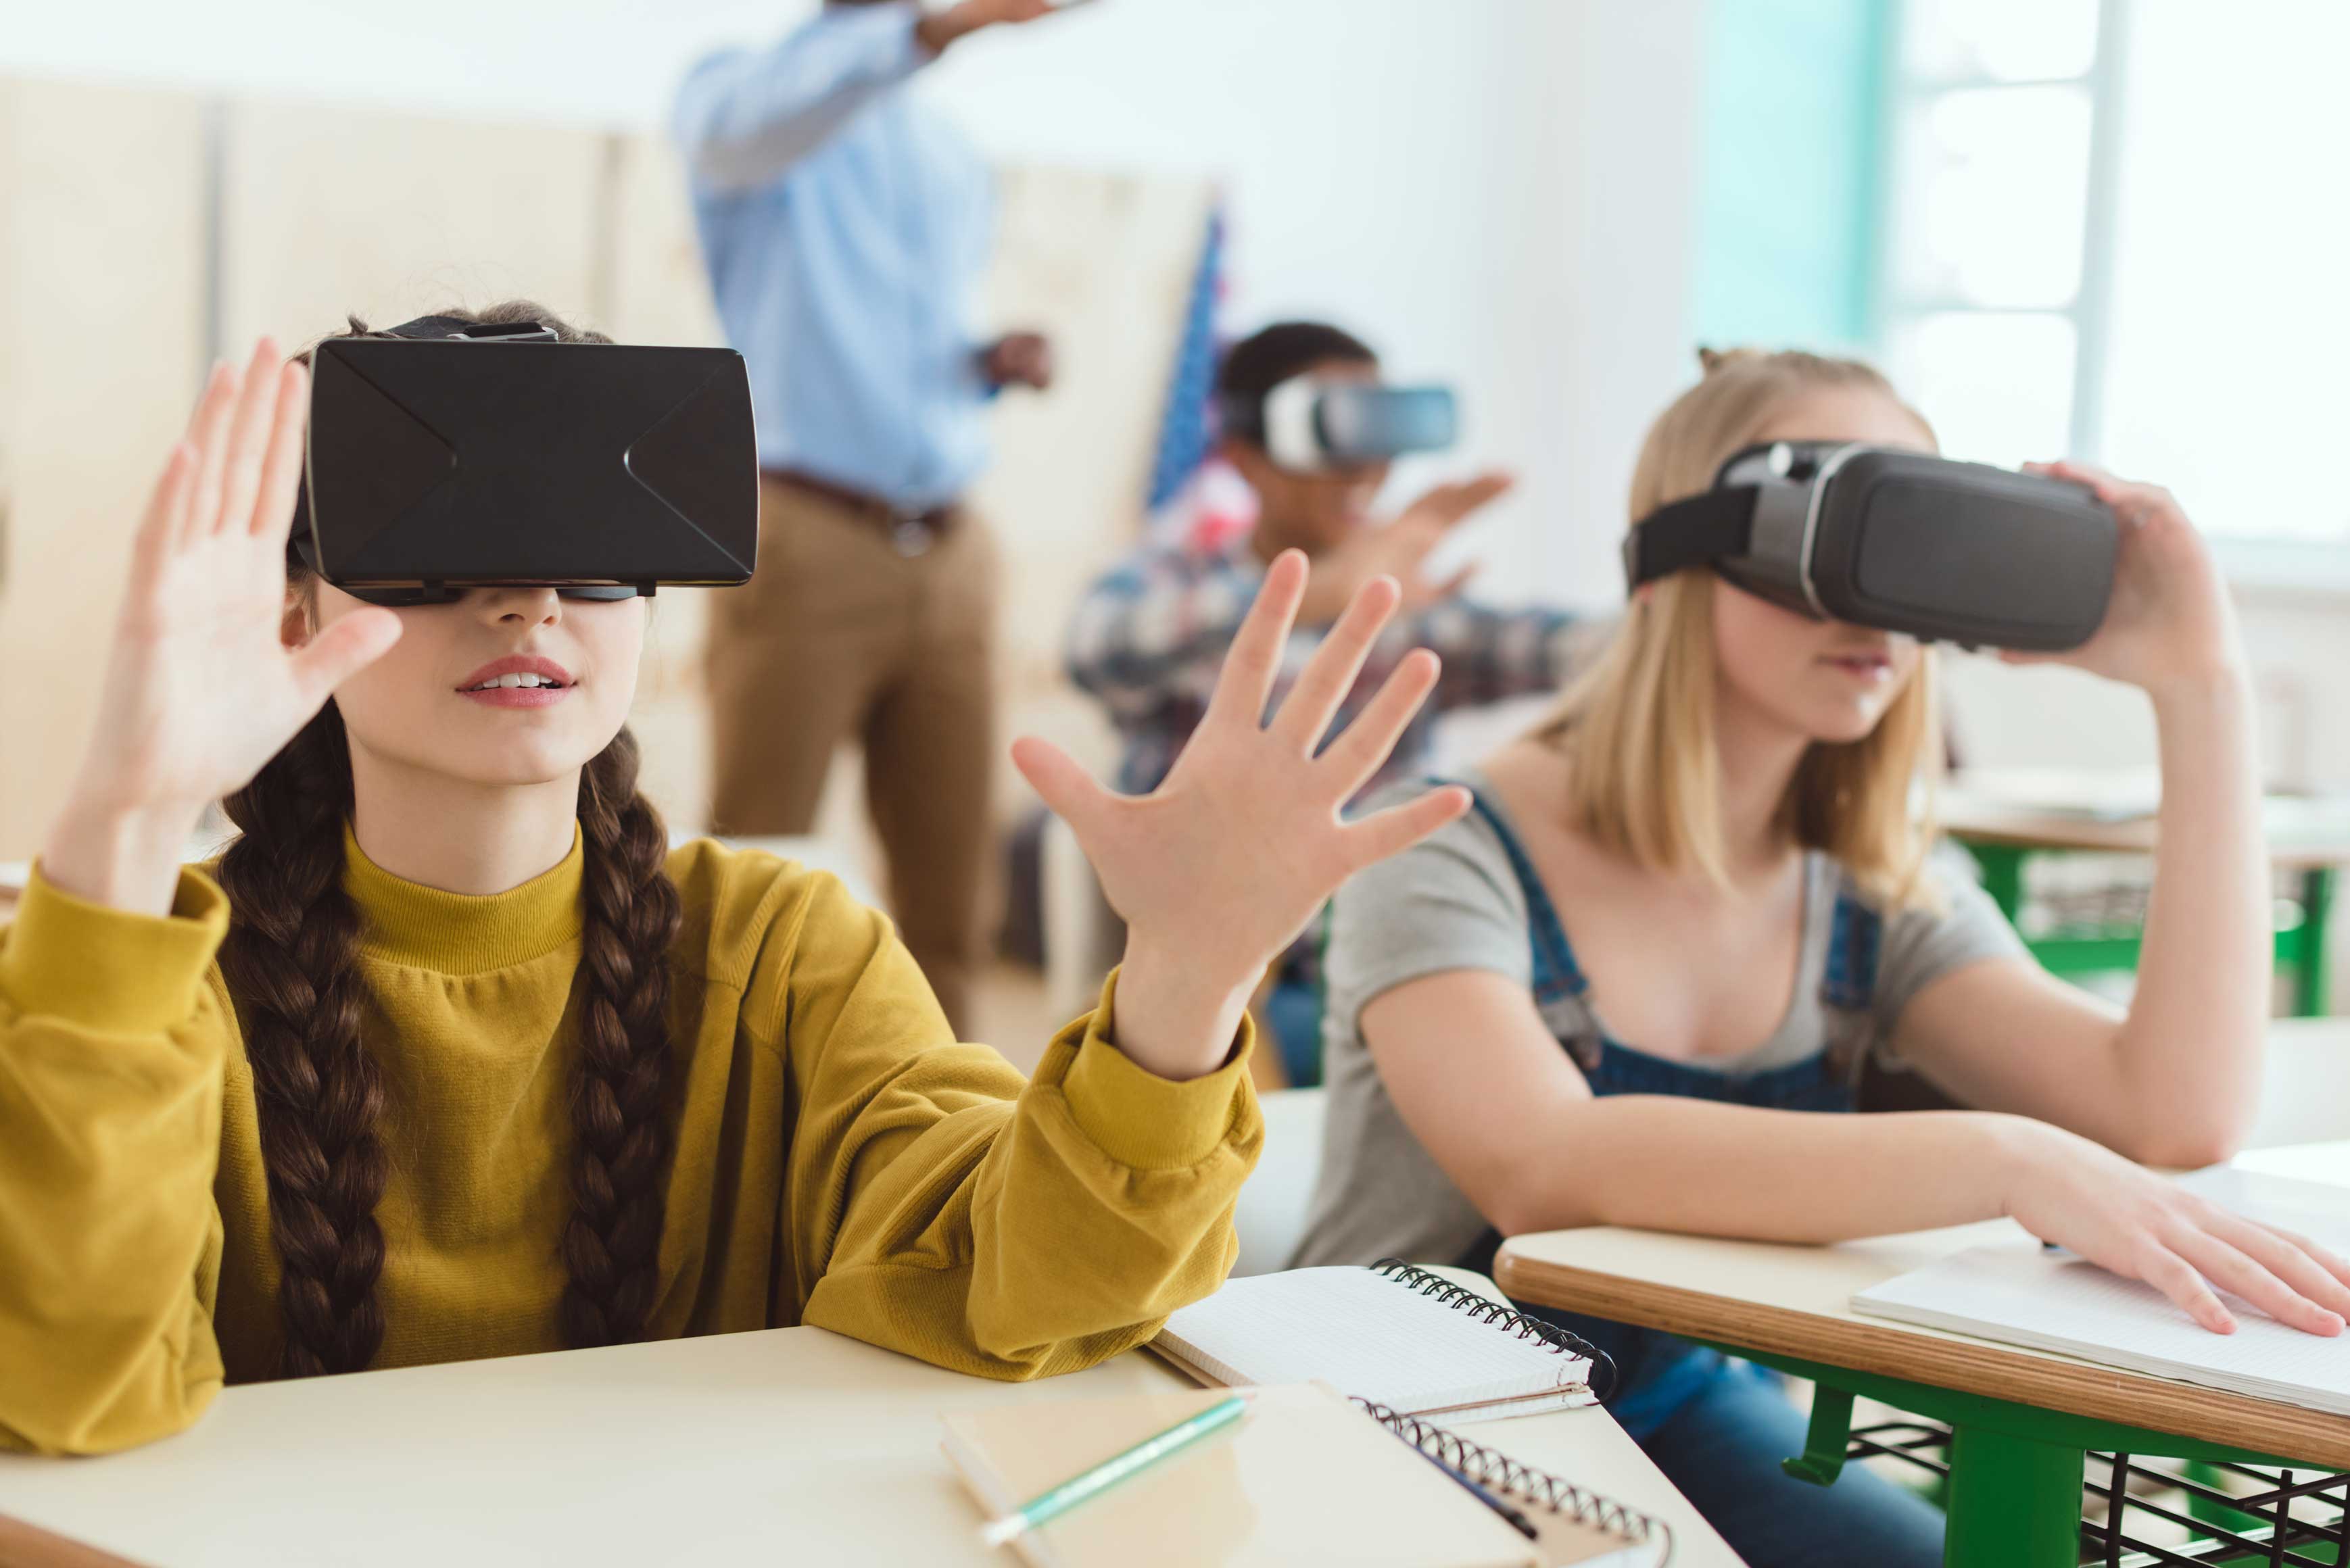 https://experied.co.uk/wp-content/uploads/2018/08/experied-vr-education-class-3.jpg